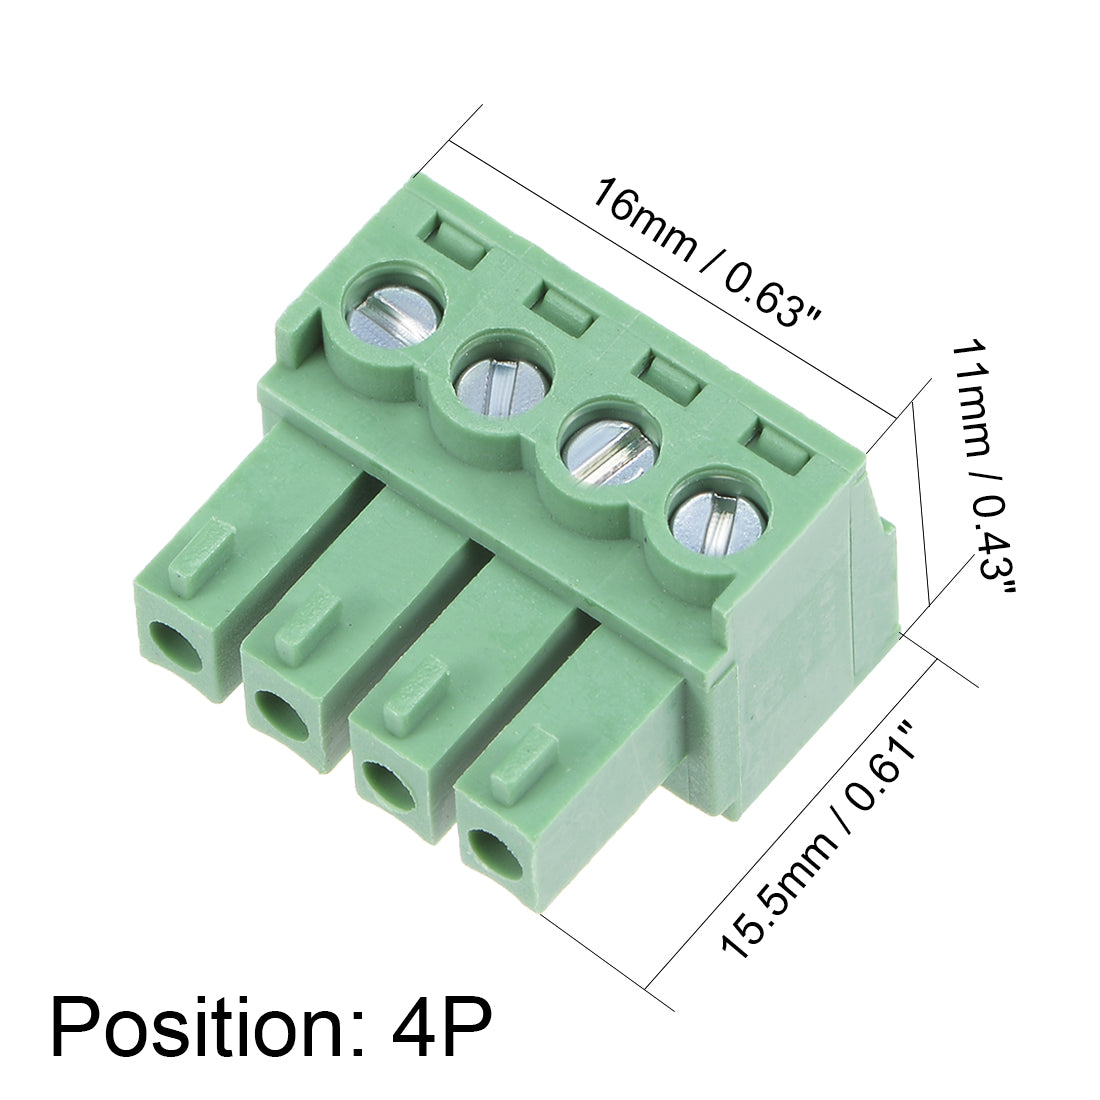 uxcell Uxcell 25Pcs AC 300V 8A 3.5mm Pitch 4P Flat Angle Needle Seat Insert-In PCB Terminal Block Connector Green